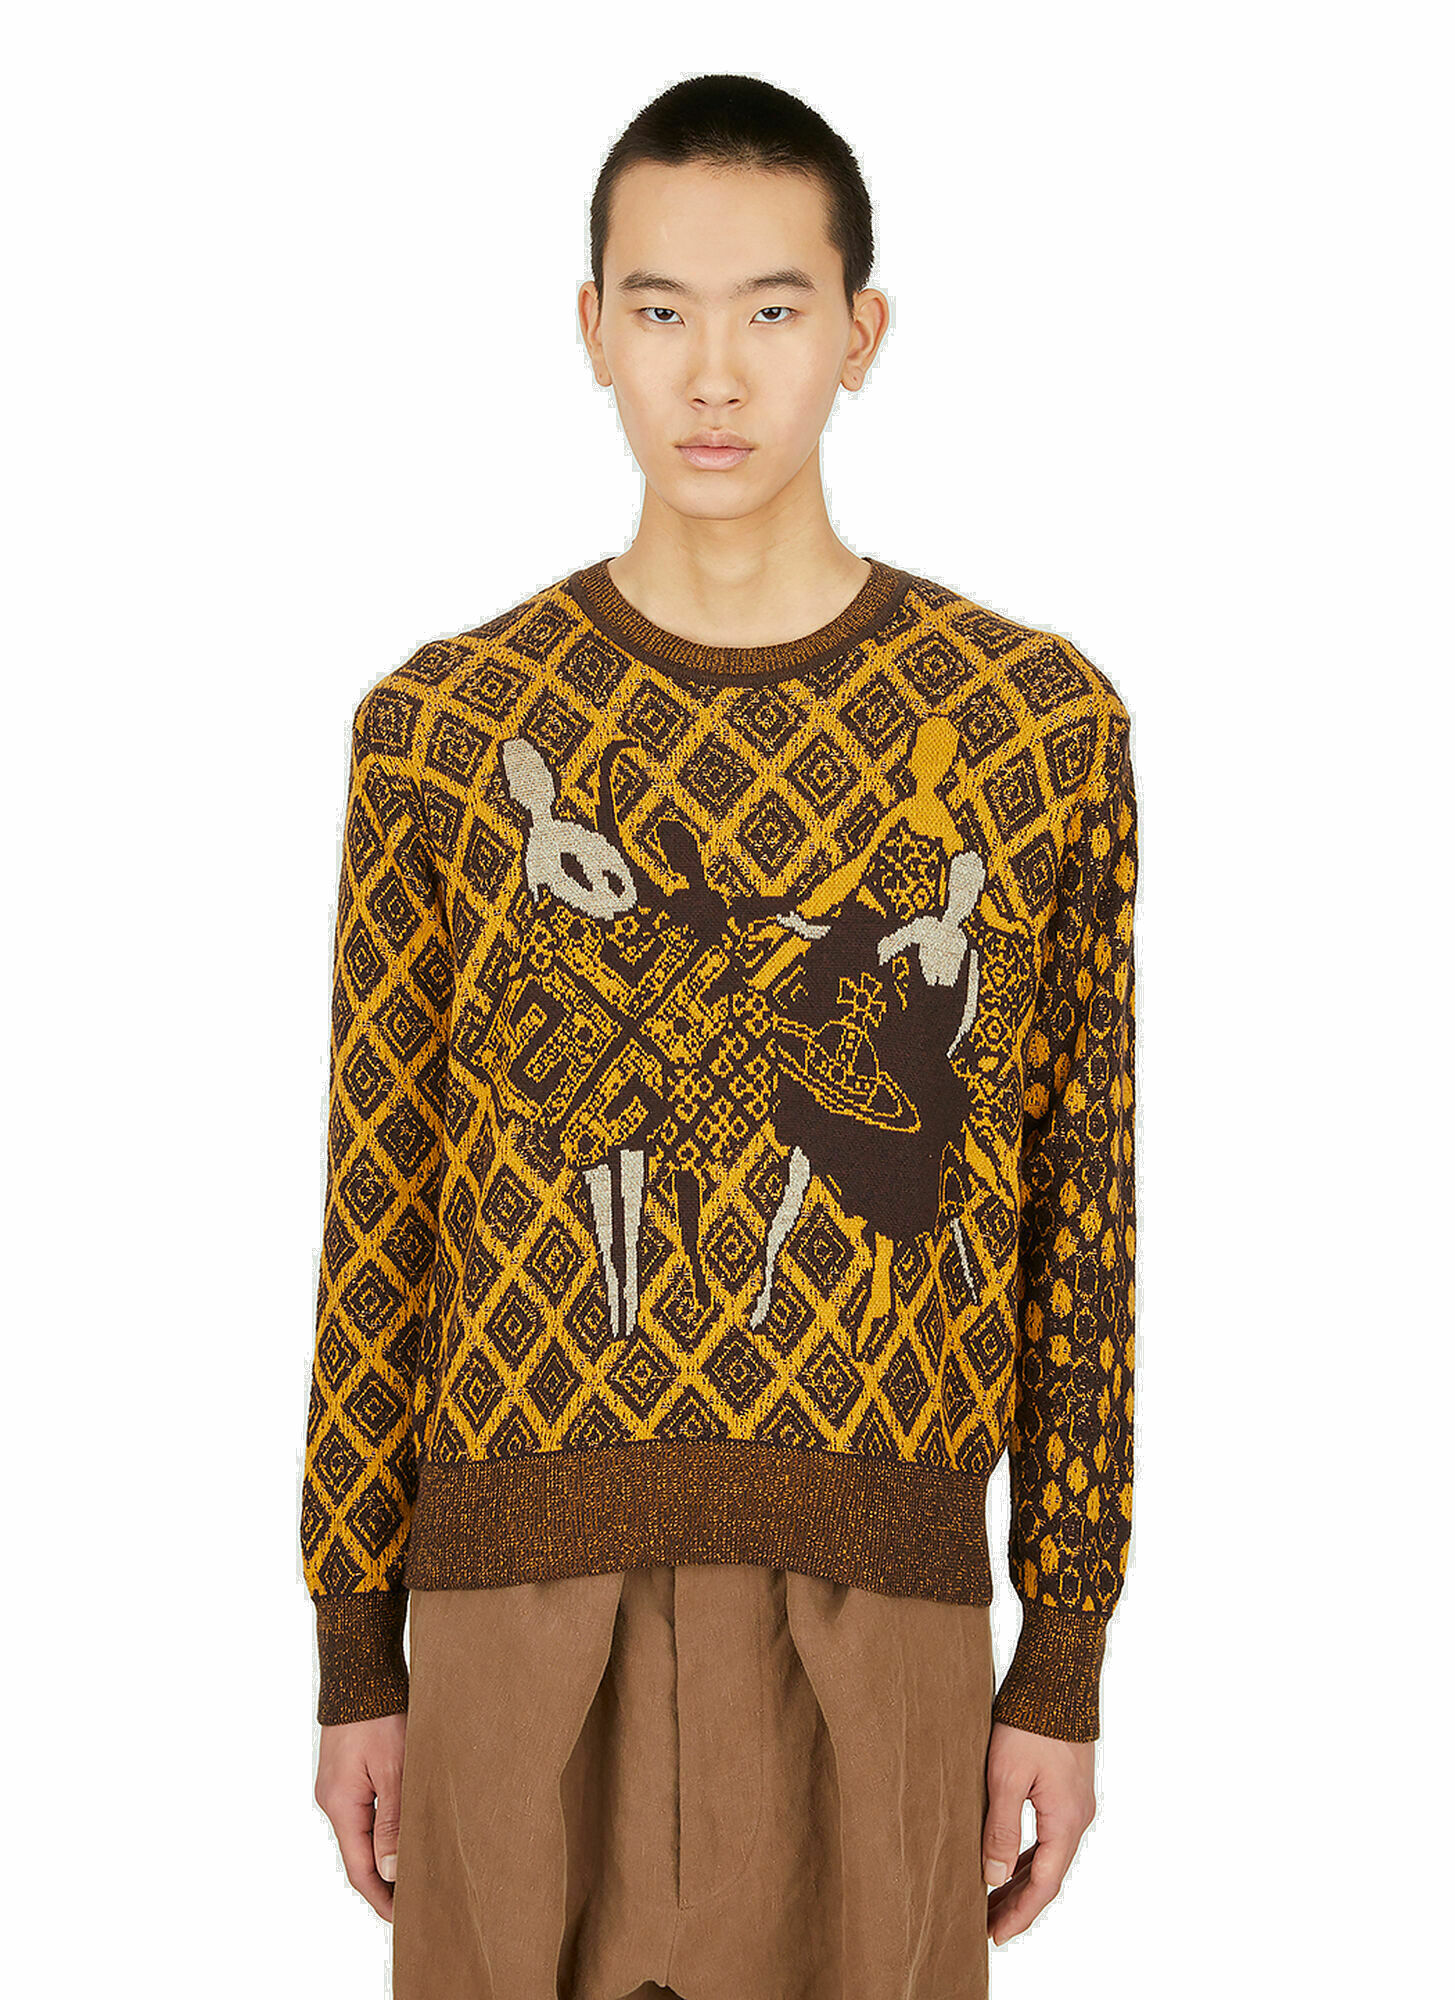 Vivienne Westwood - Final Patched Sweater in Yellow Vivienne Westwood